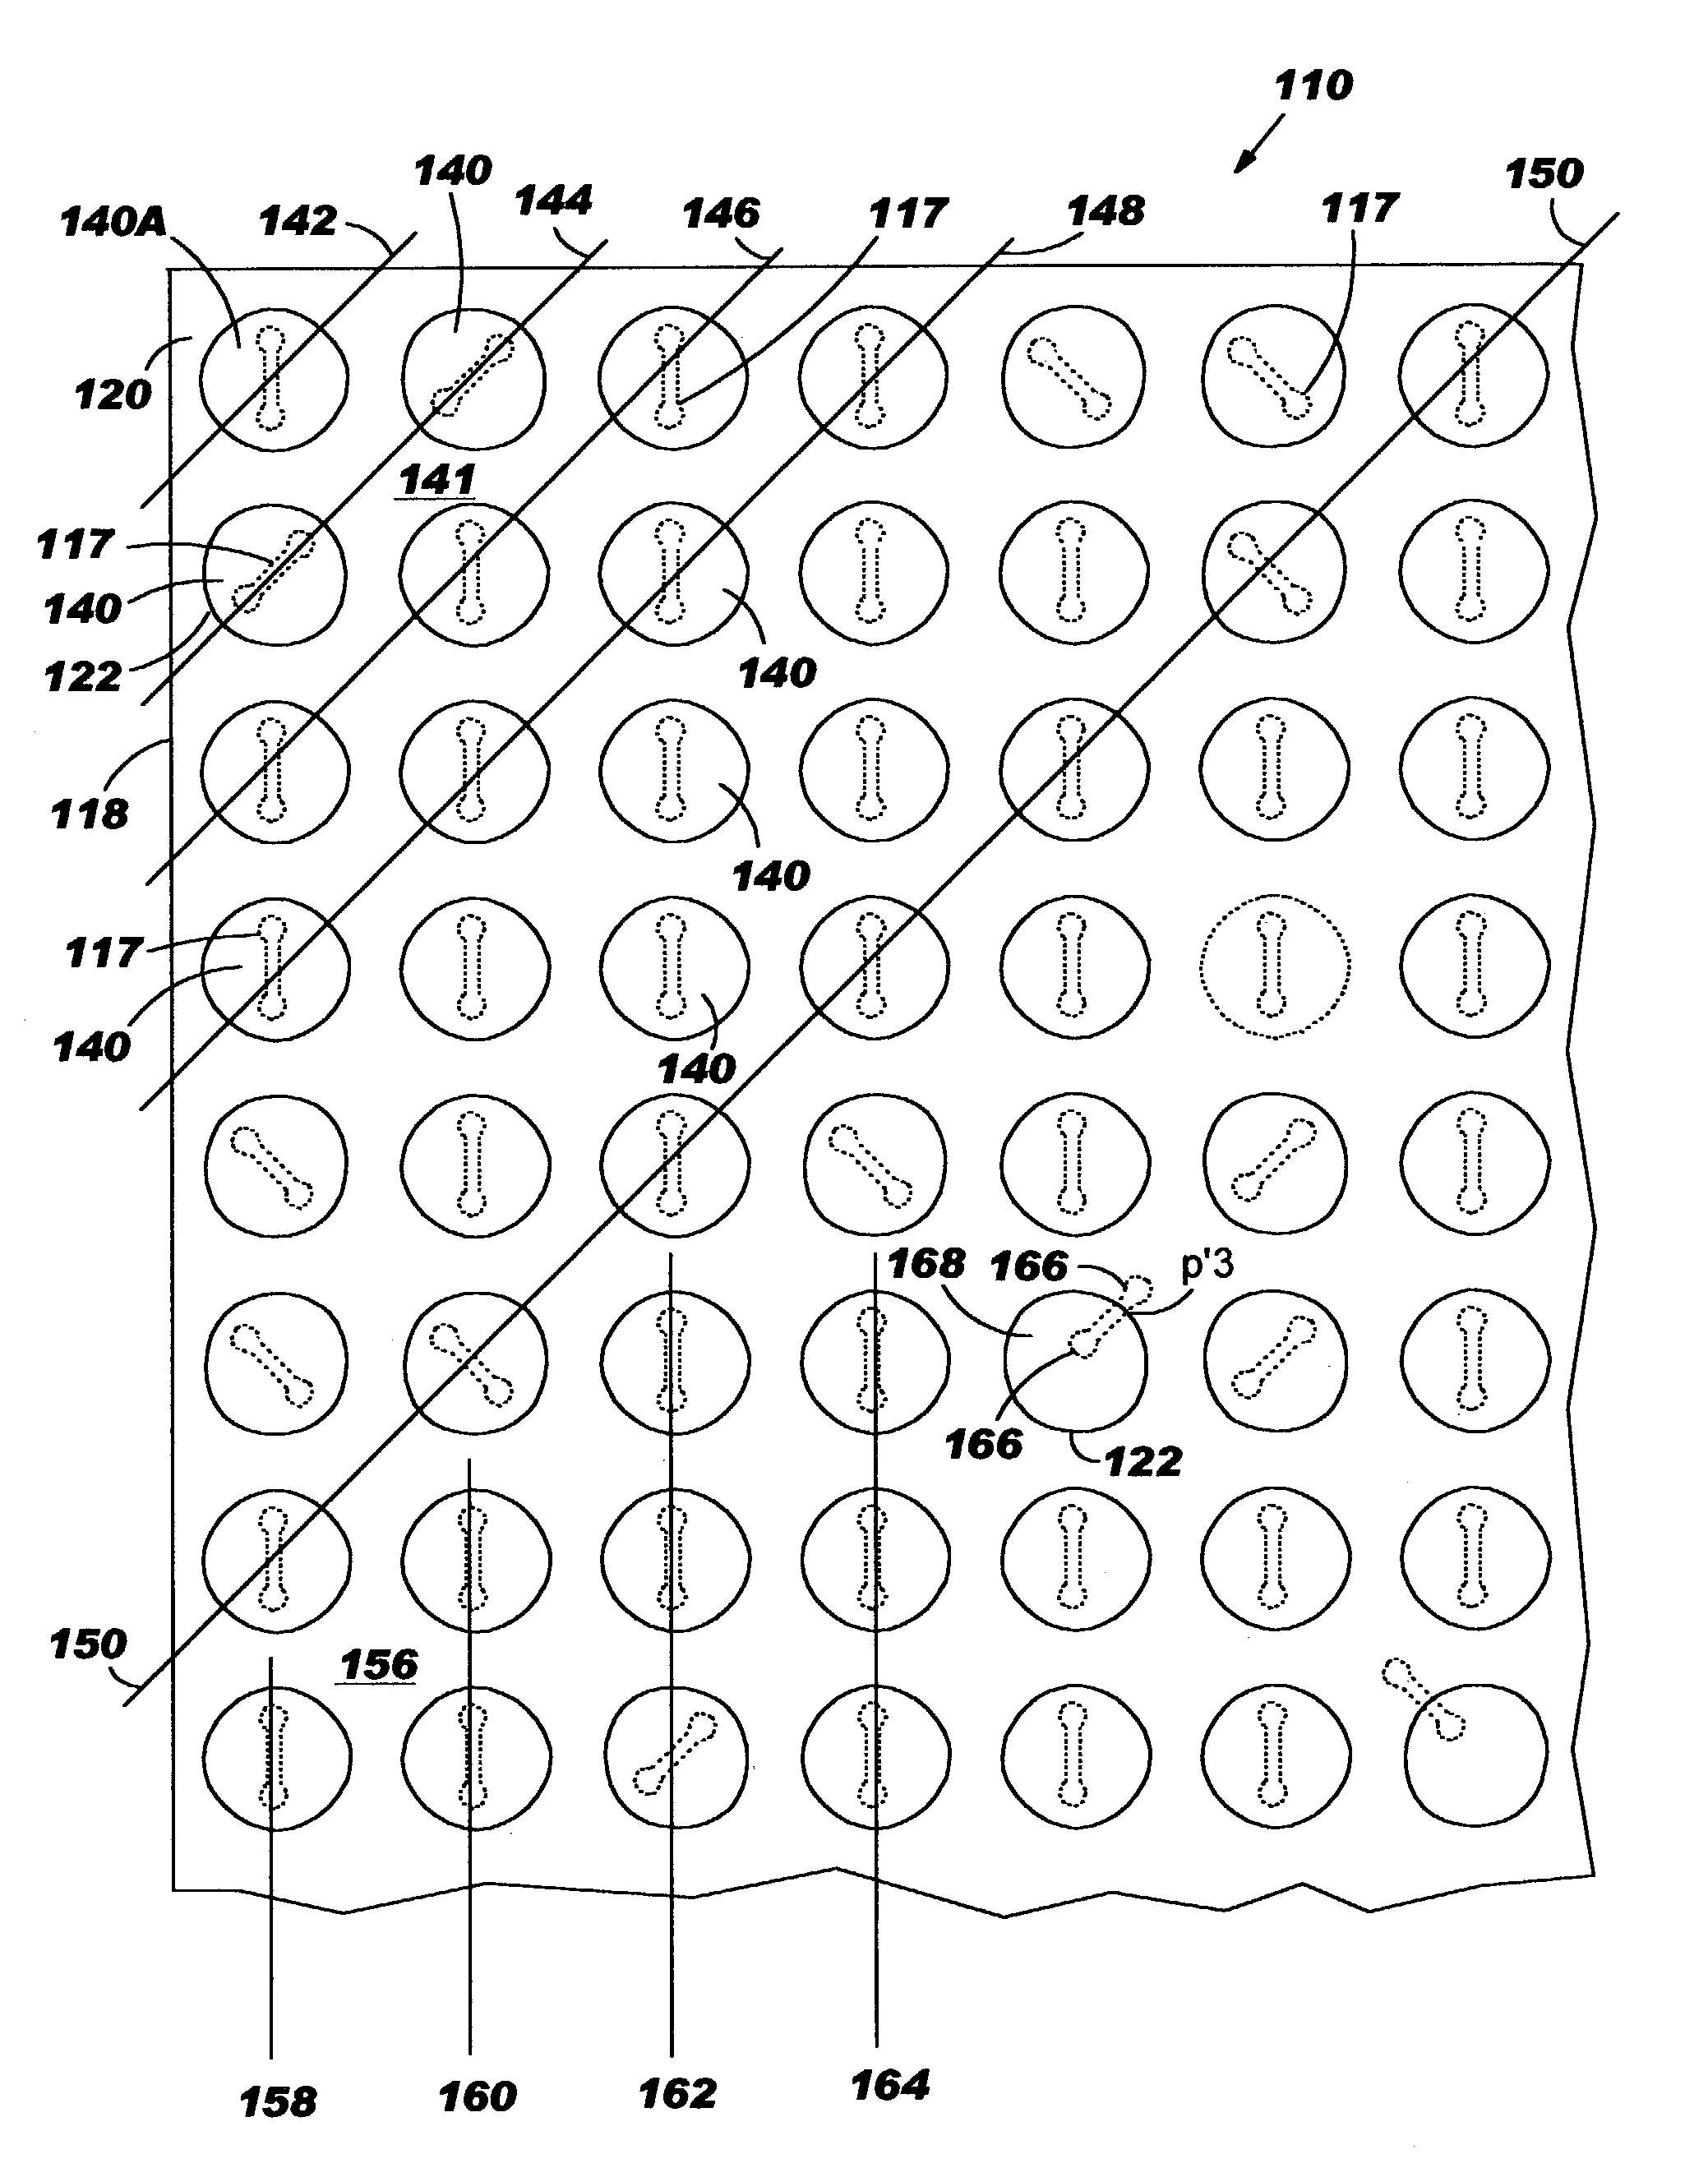 Electronic package with optimized circuitization pattern